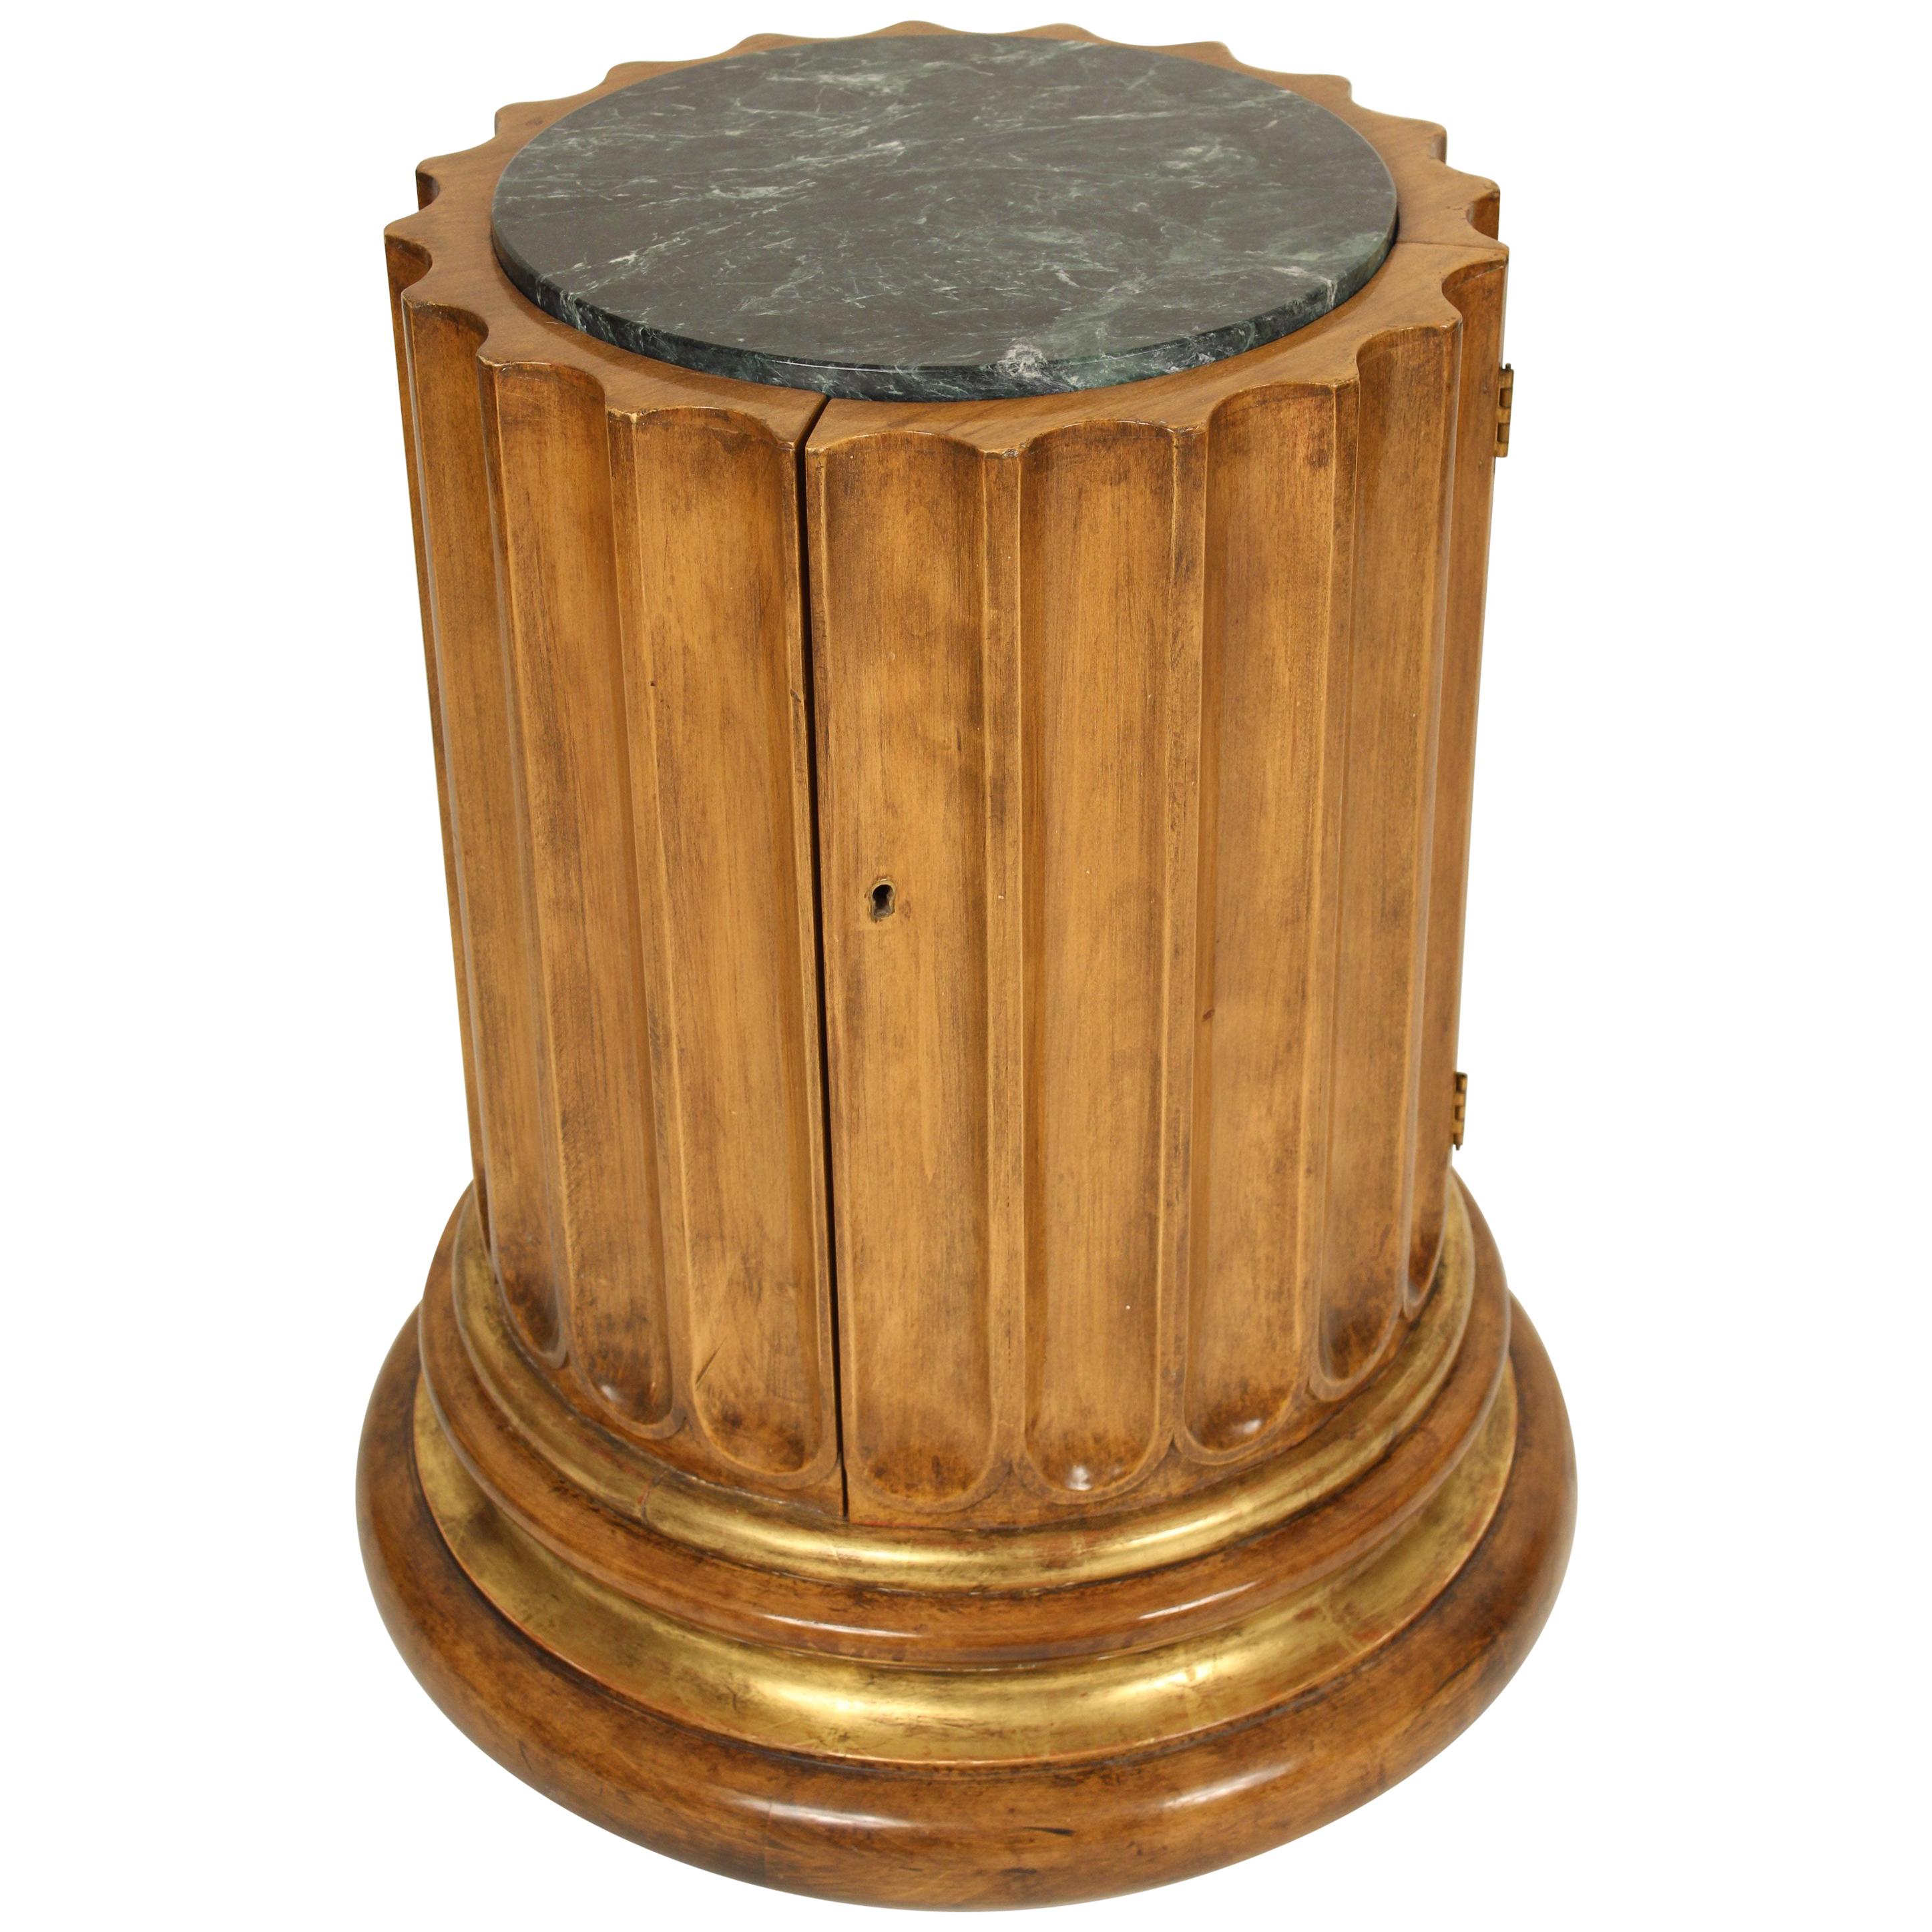 Columnar form occasional table attributed to Therien and Company